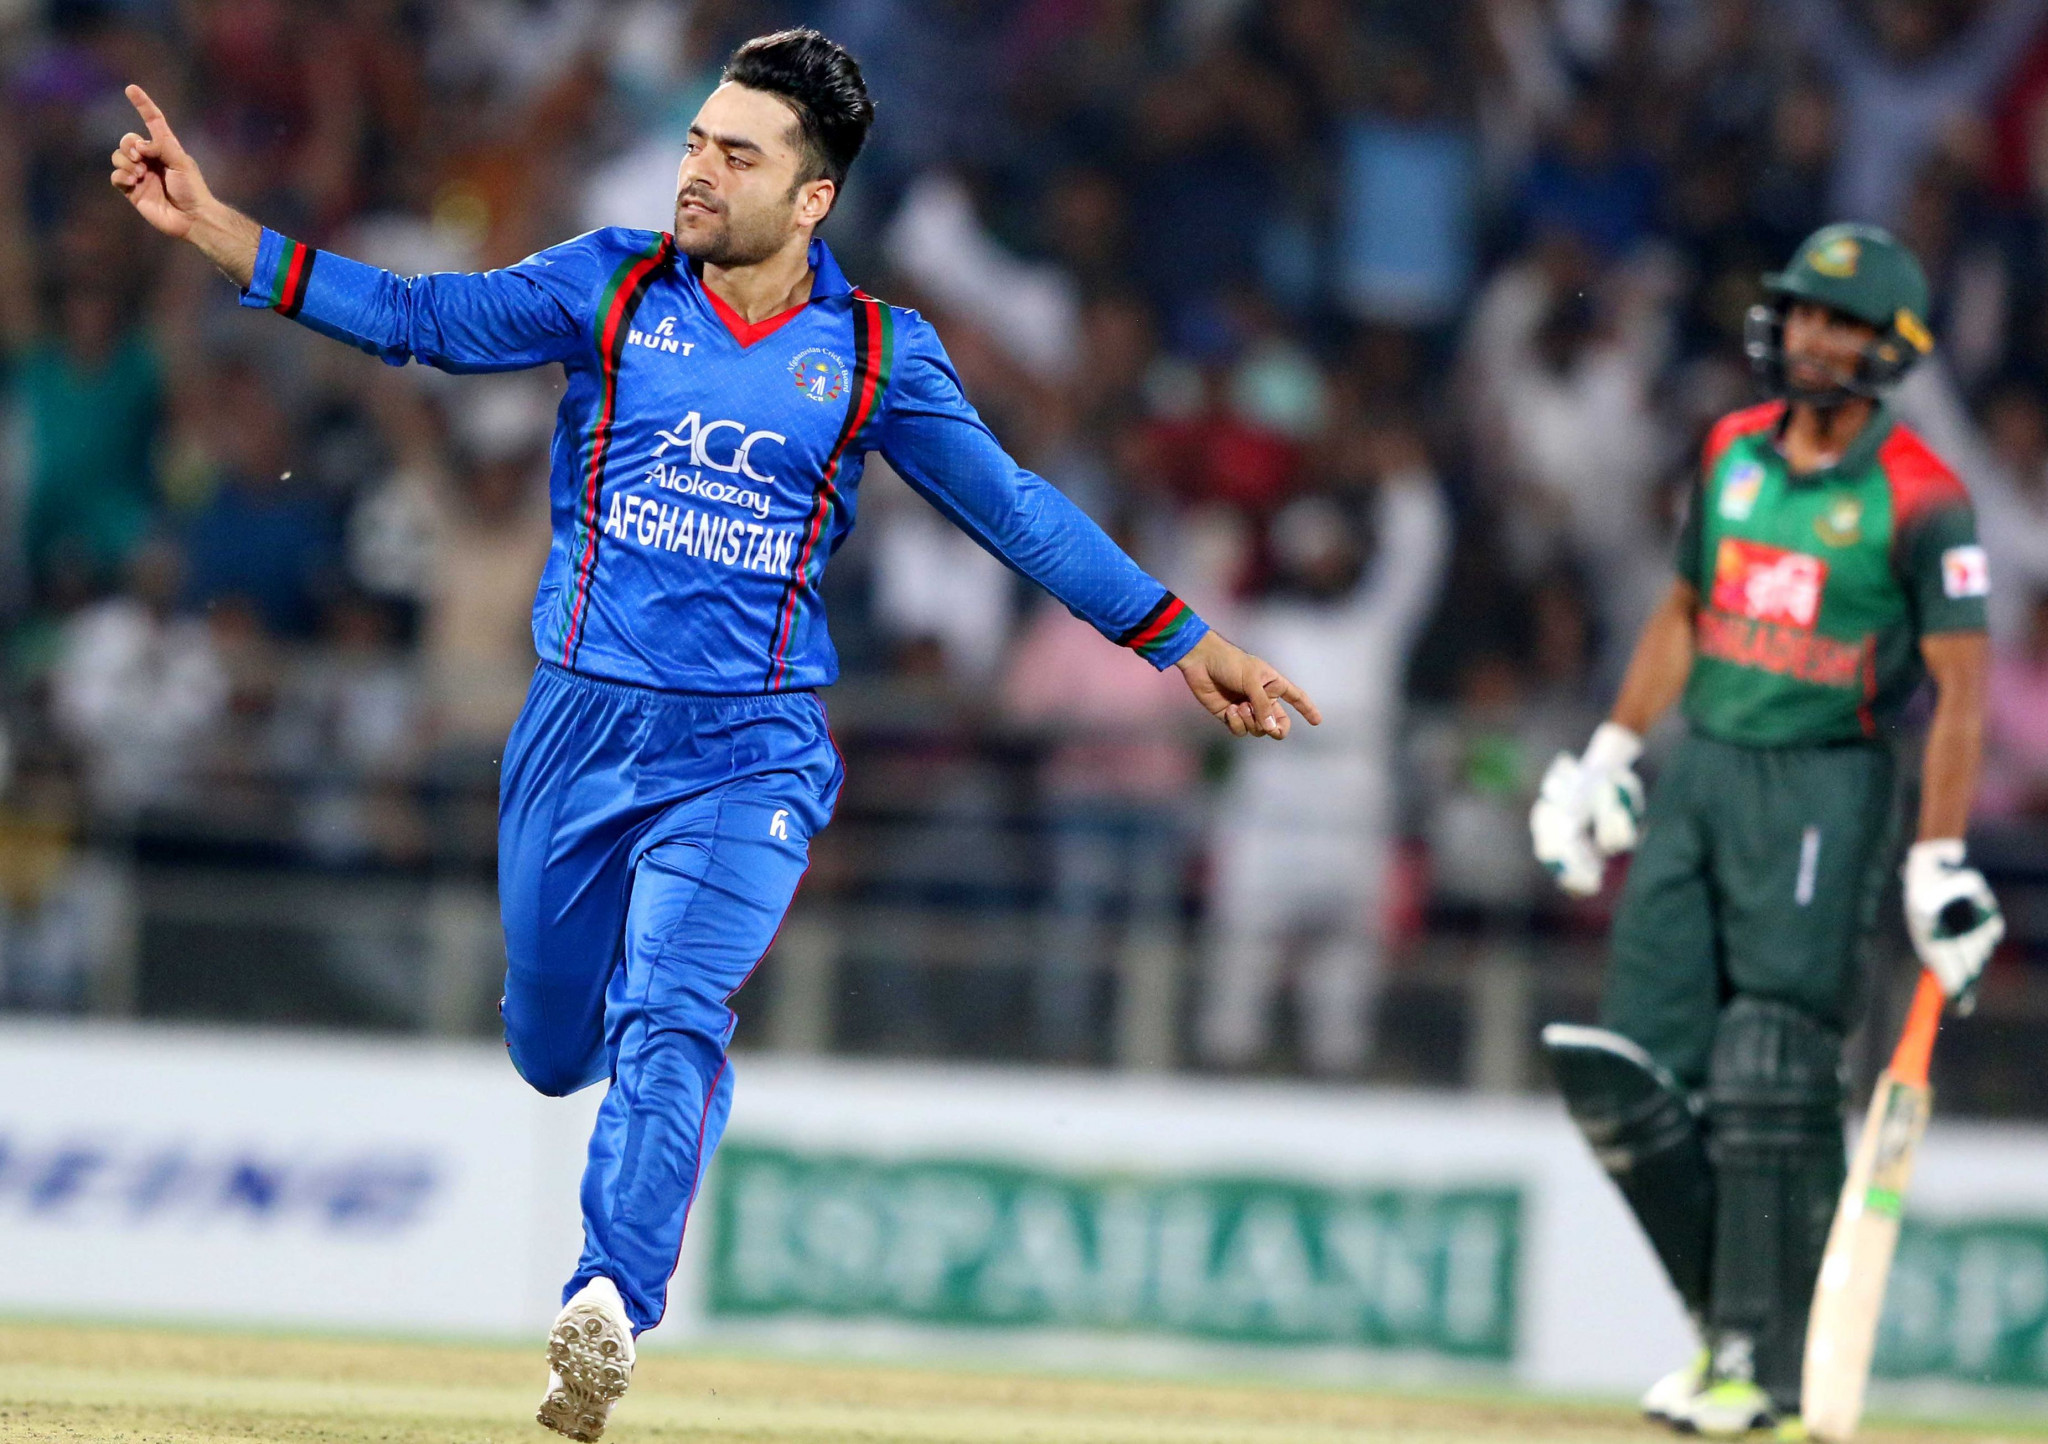 Rashid Khan and Afghanistan are preparing for their debut Test match ©Getty Images